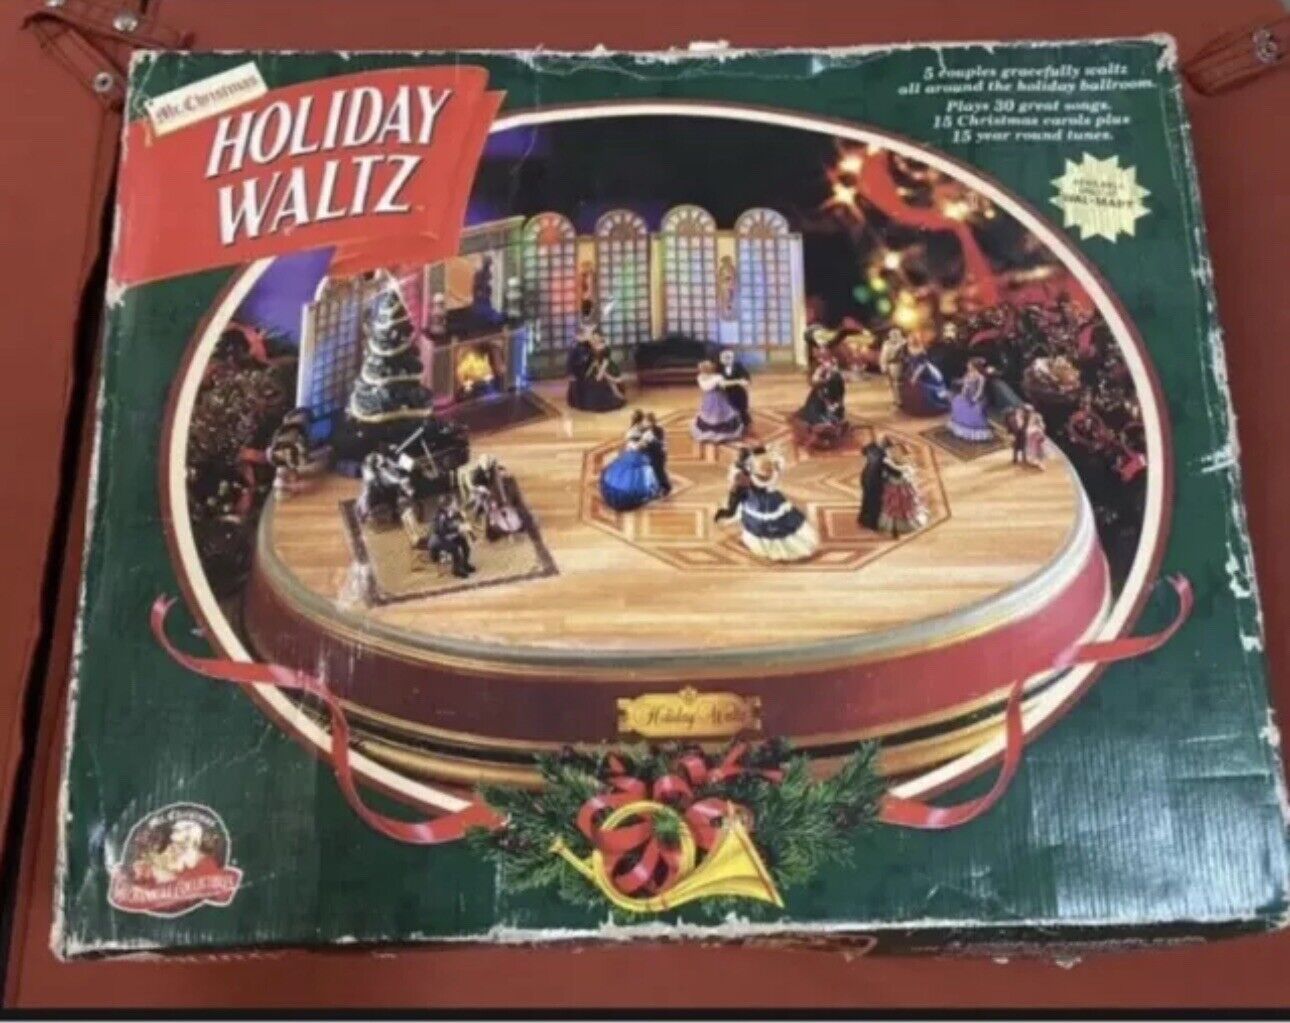 Vintage Mr. Christmas Holiday Waltz1996 Complete With Box & Manual.